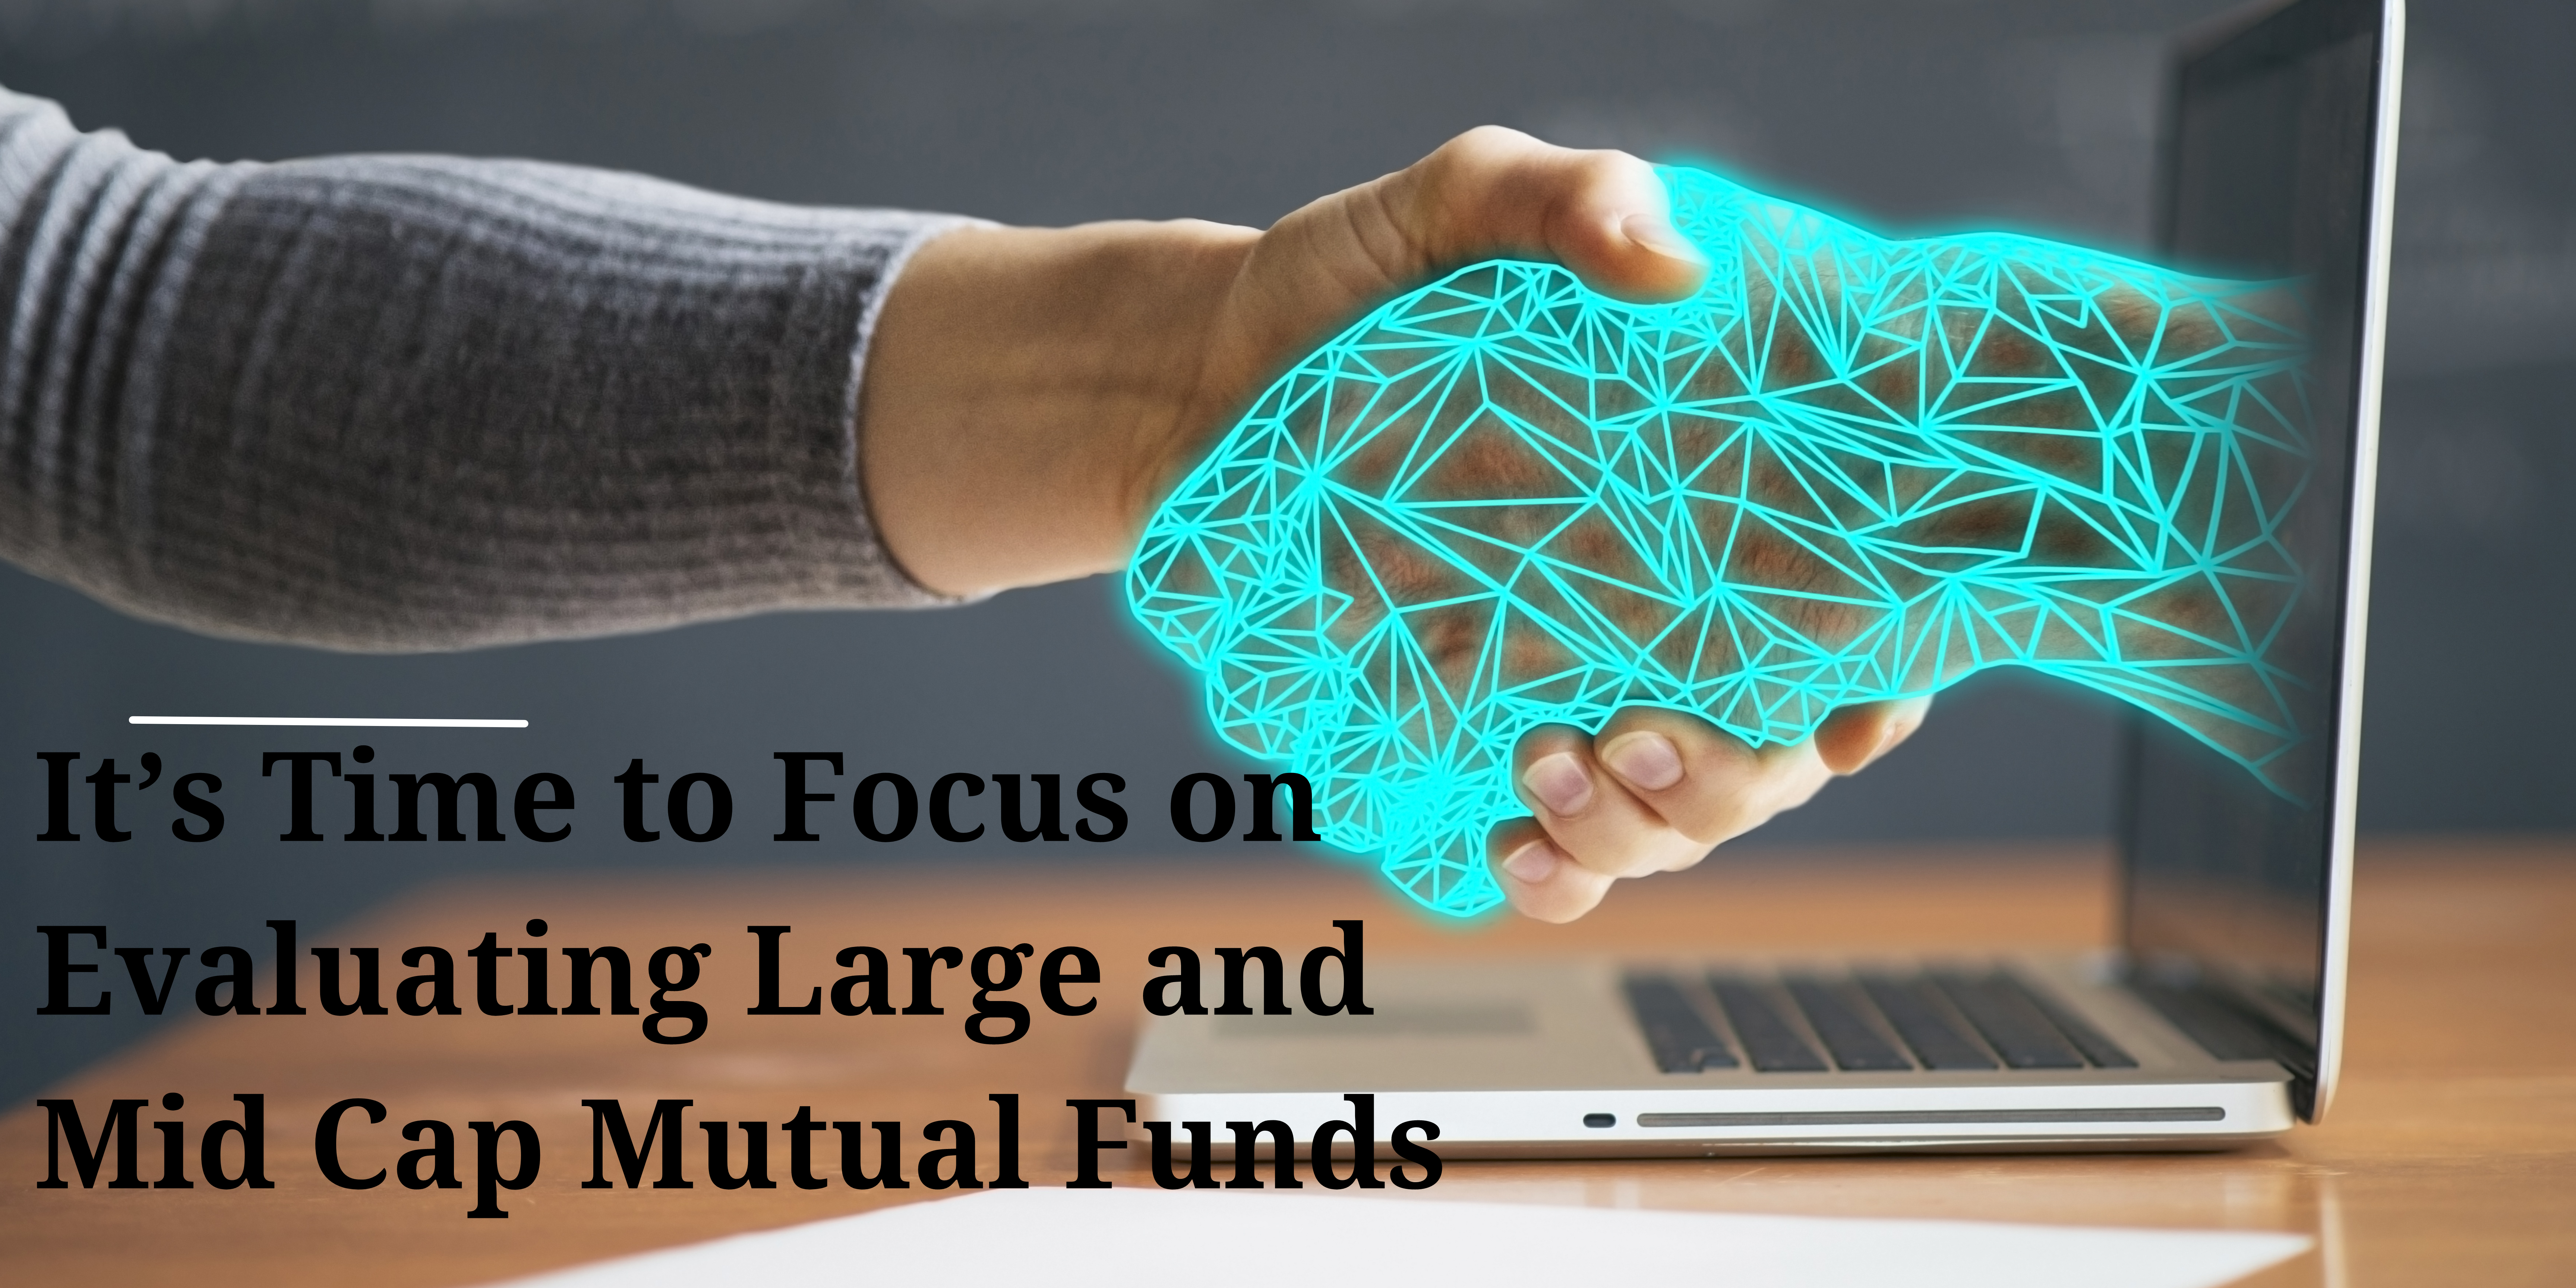 It’s Time to Focus on Evaluating Large and Mid Cap Mutual Funds